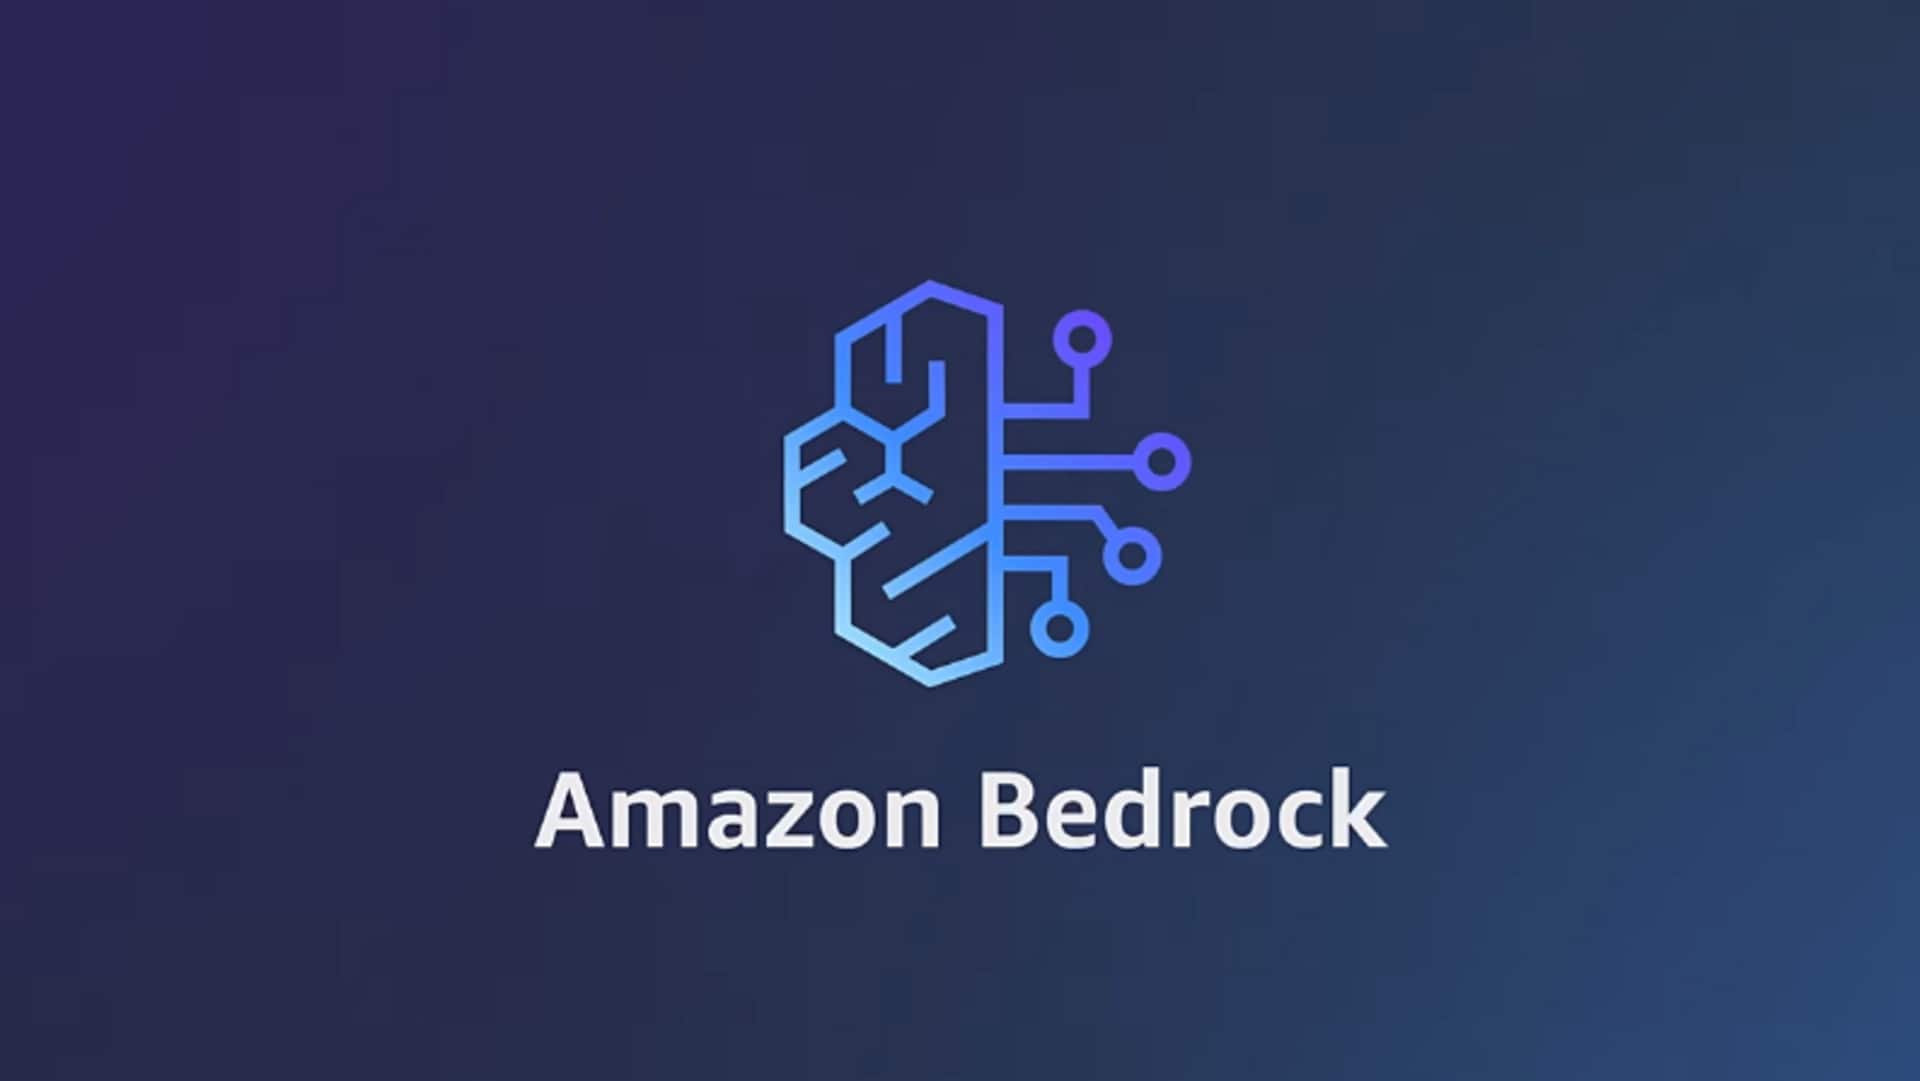 Amazon launches AI model evaluation on Bedrock: How it works